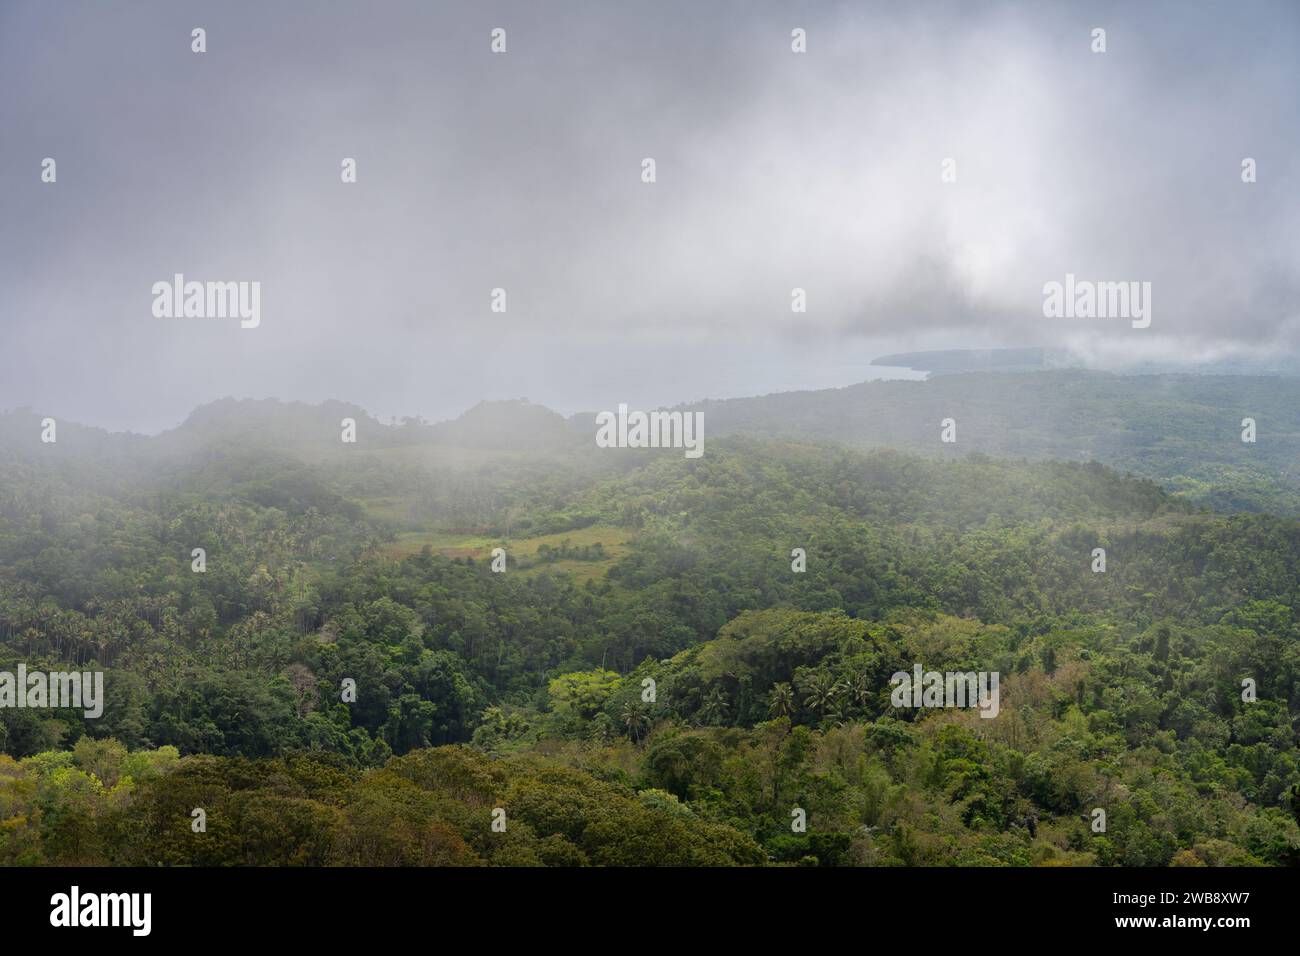 An aerial view of Mt Bandilaan National Park, Siquijor, Philippines on a cloudy day Stock Photo